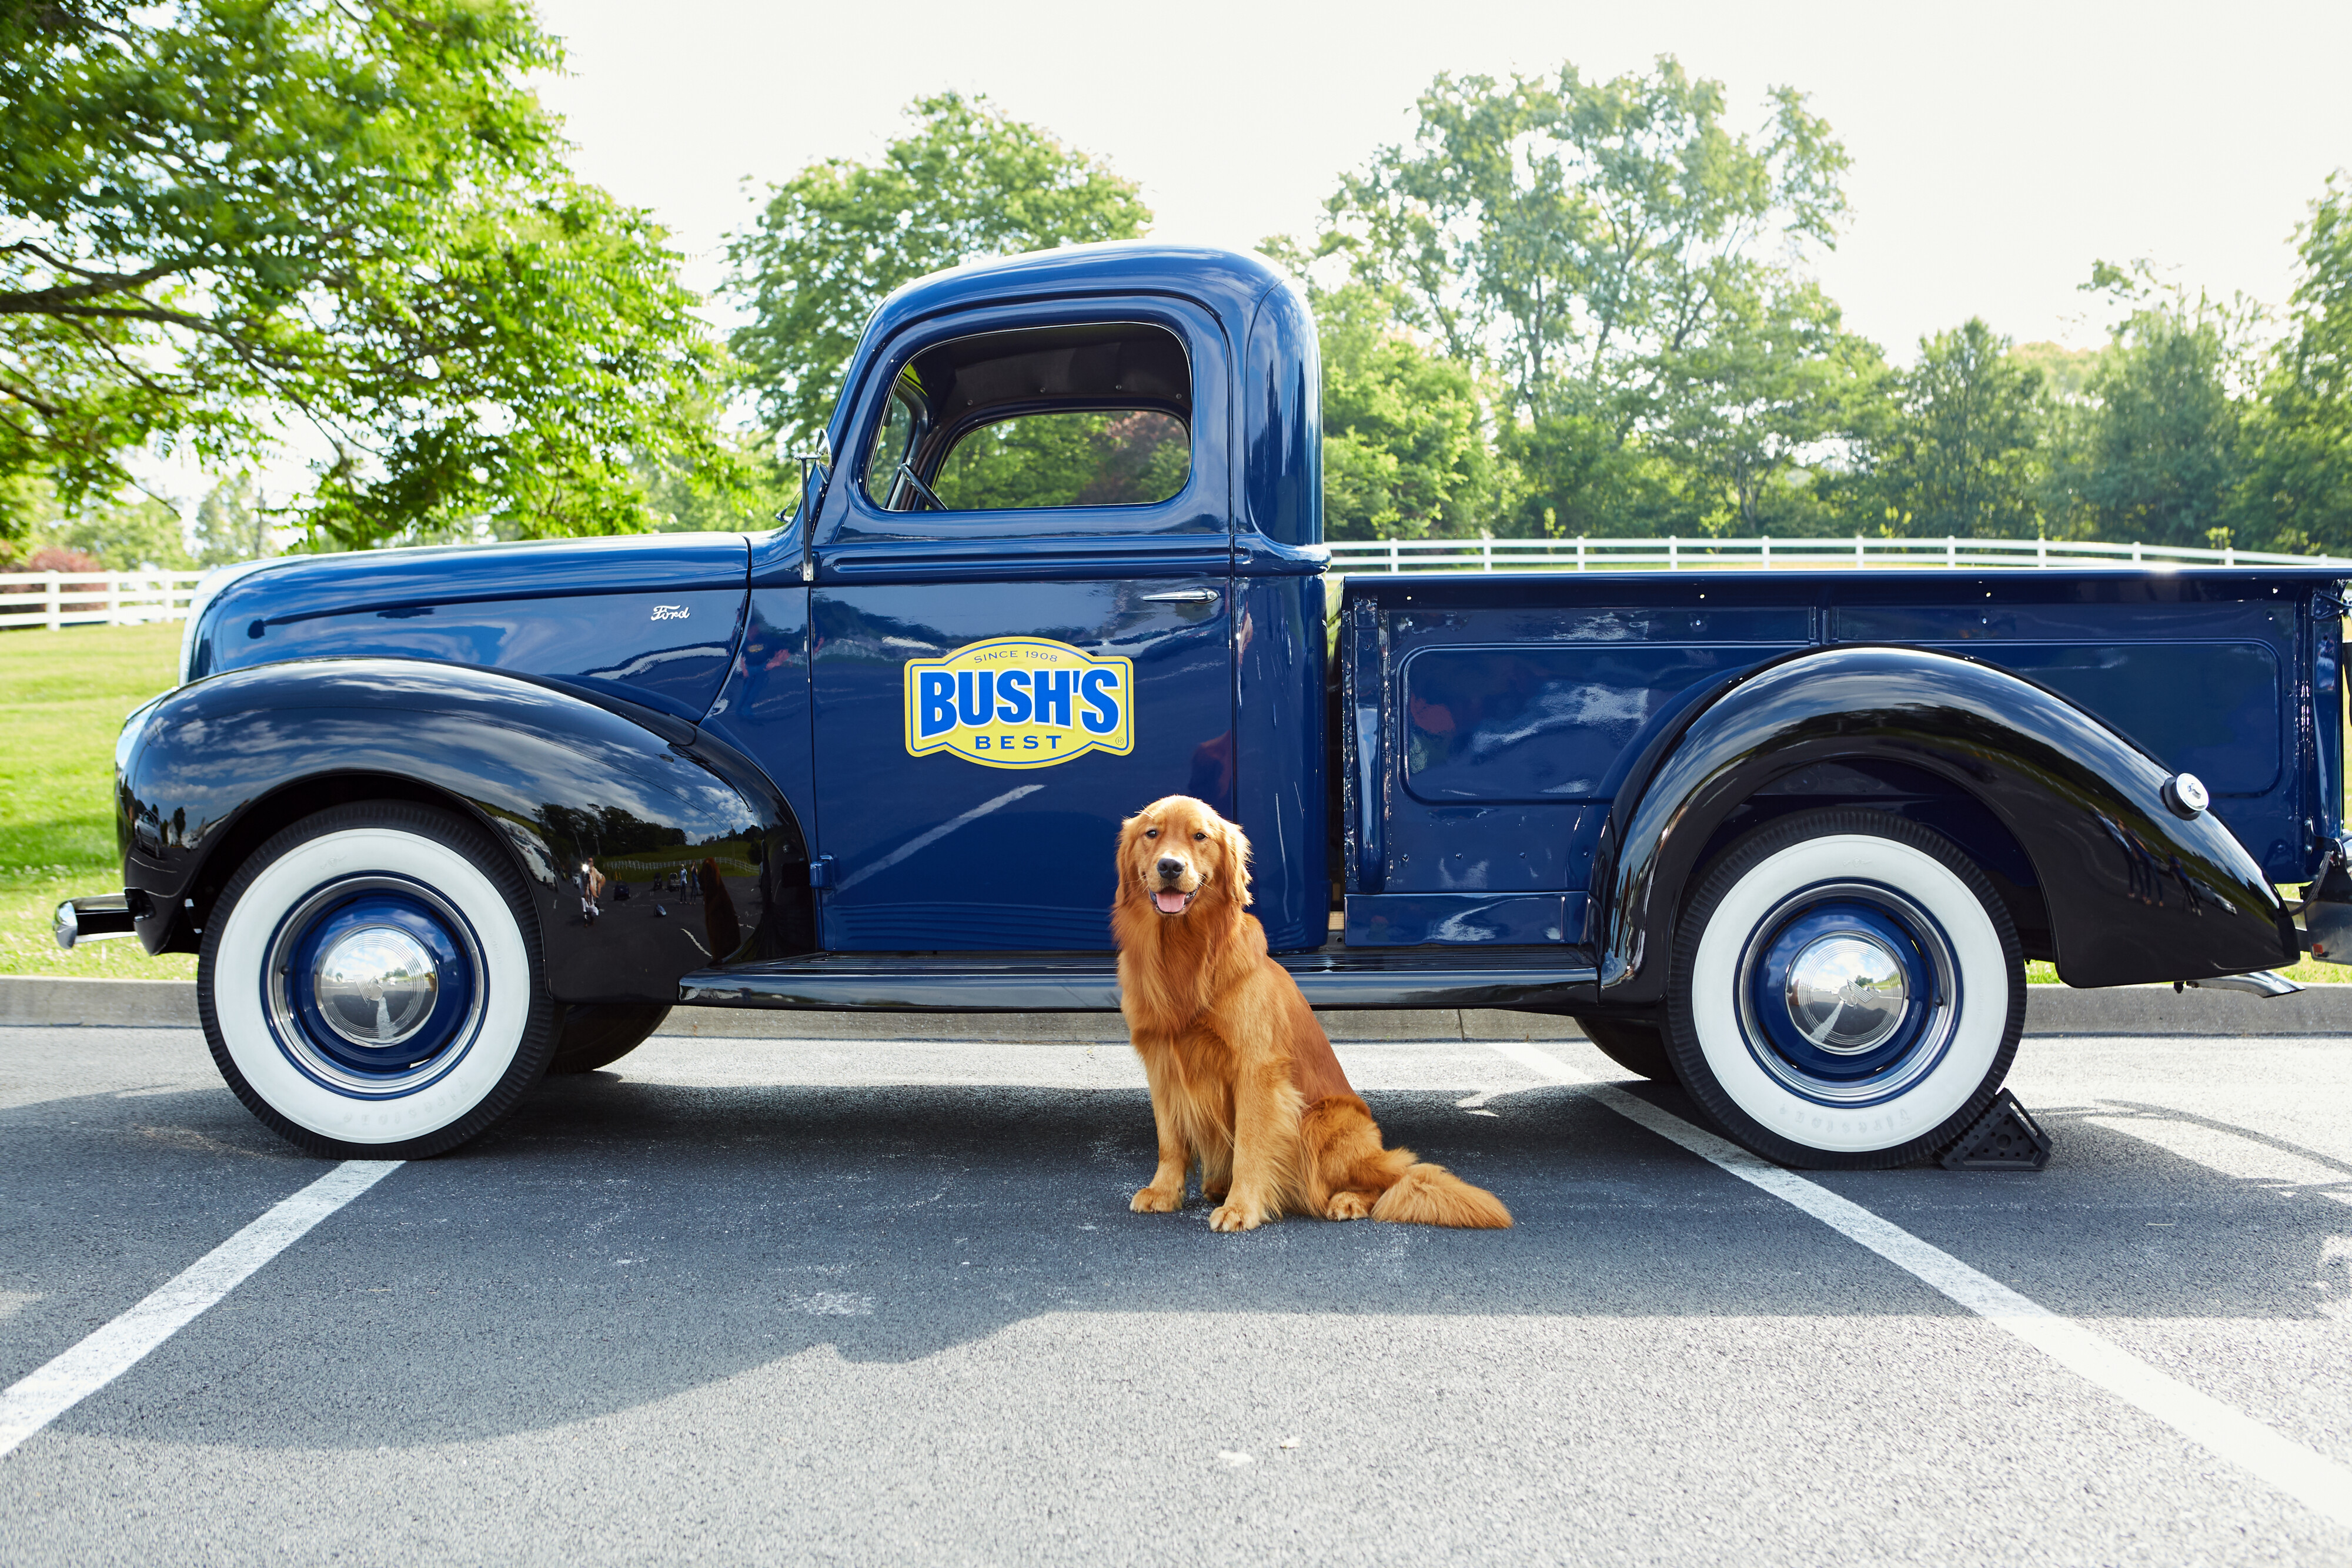 A golden retriever in front of a vintage pickup truck